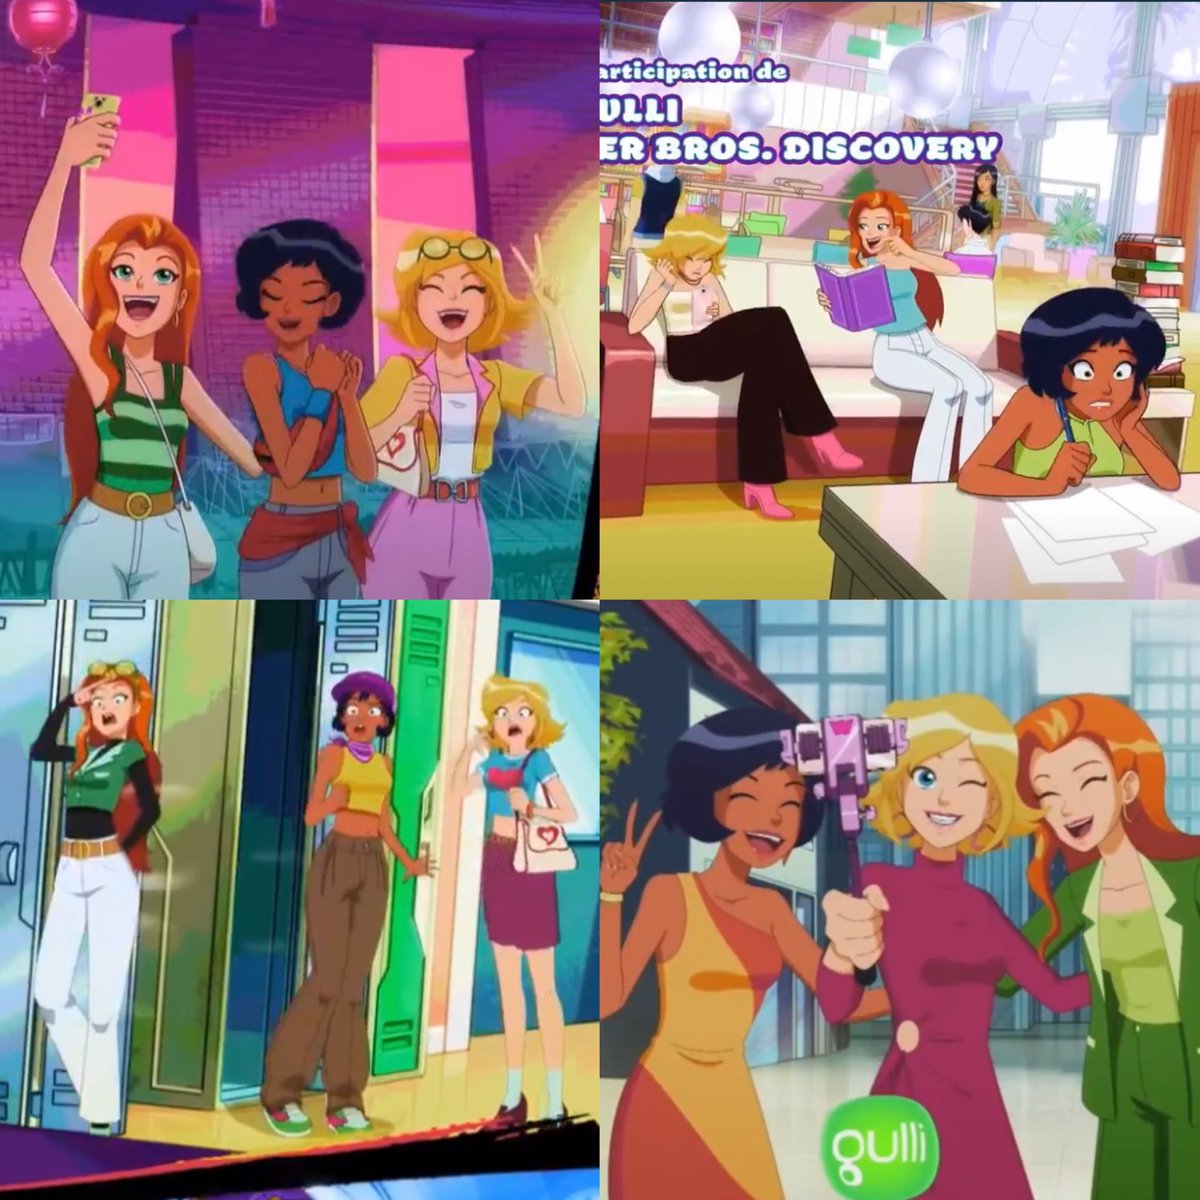 Totally Spies coming back to serve us new outfits every episode… real TV is back!